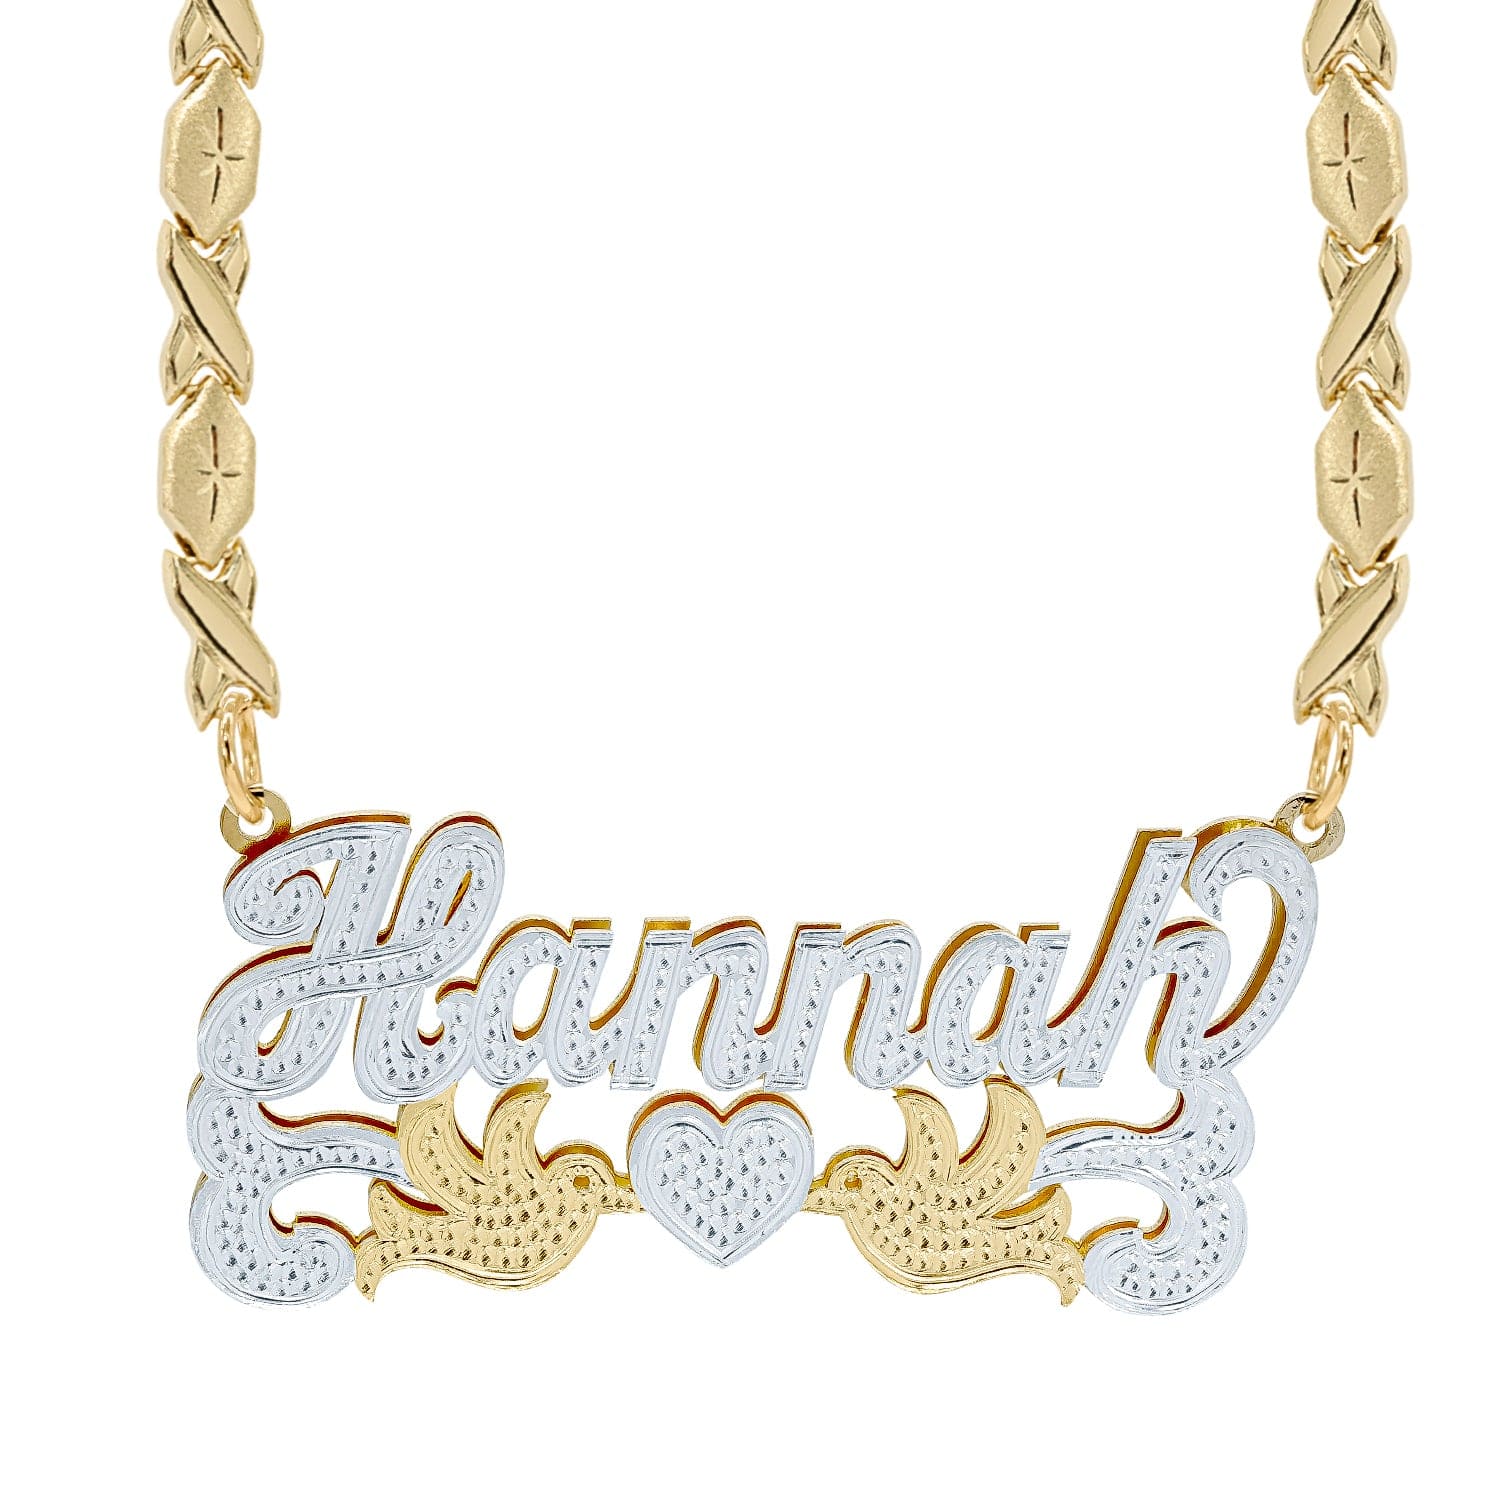 Two-Tone. Sterling Silver / Xoxo Chain Double Nameplate Necklace w/ Love Birds "Hannah" with Xoxo chain